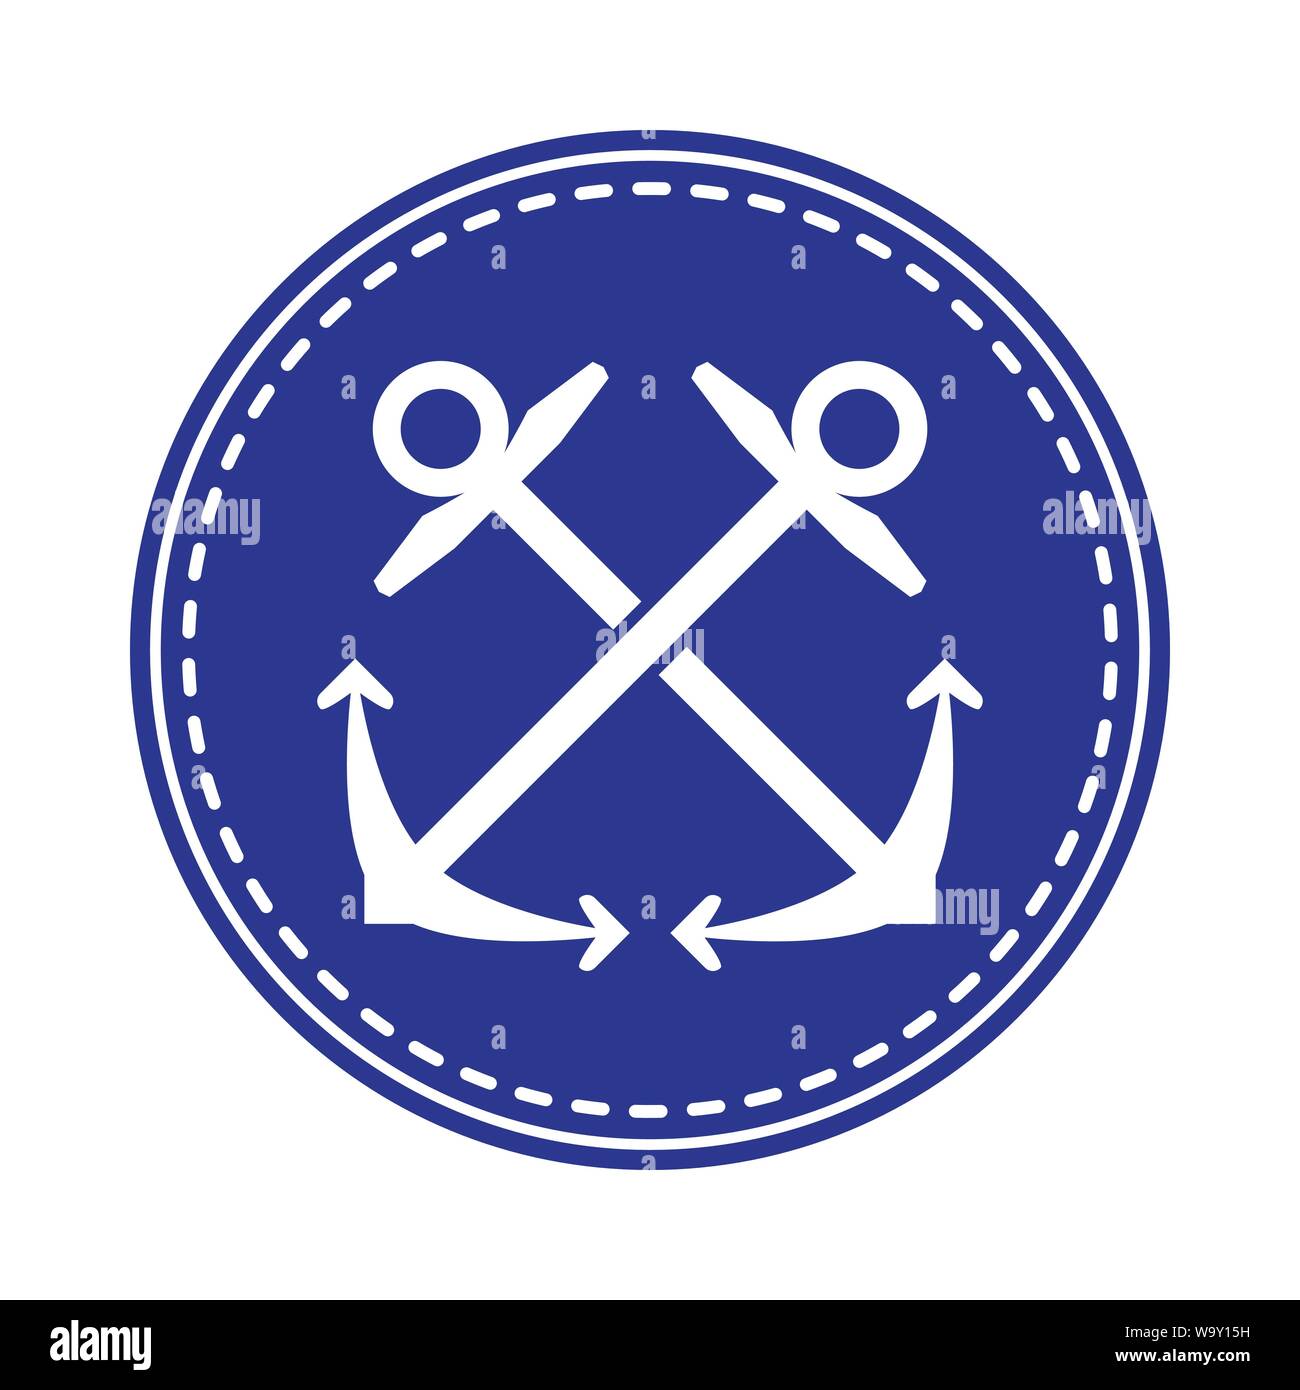 Navy Crossed Anchors